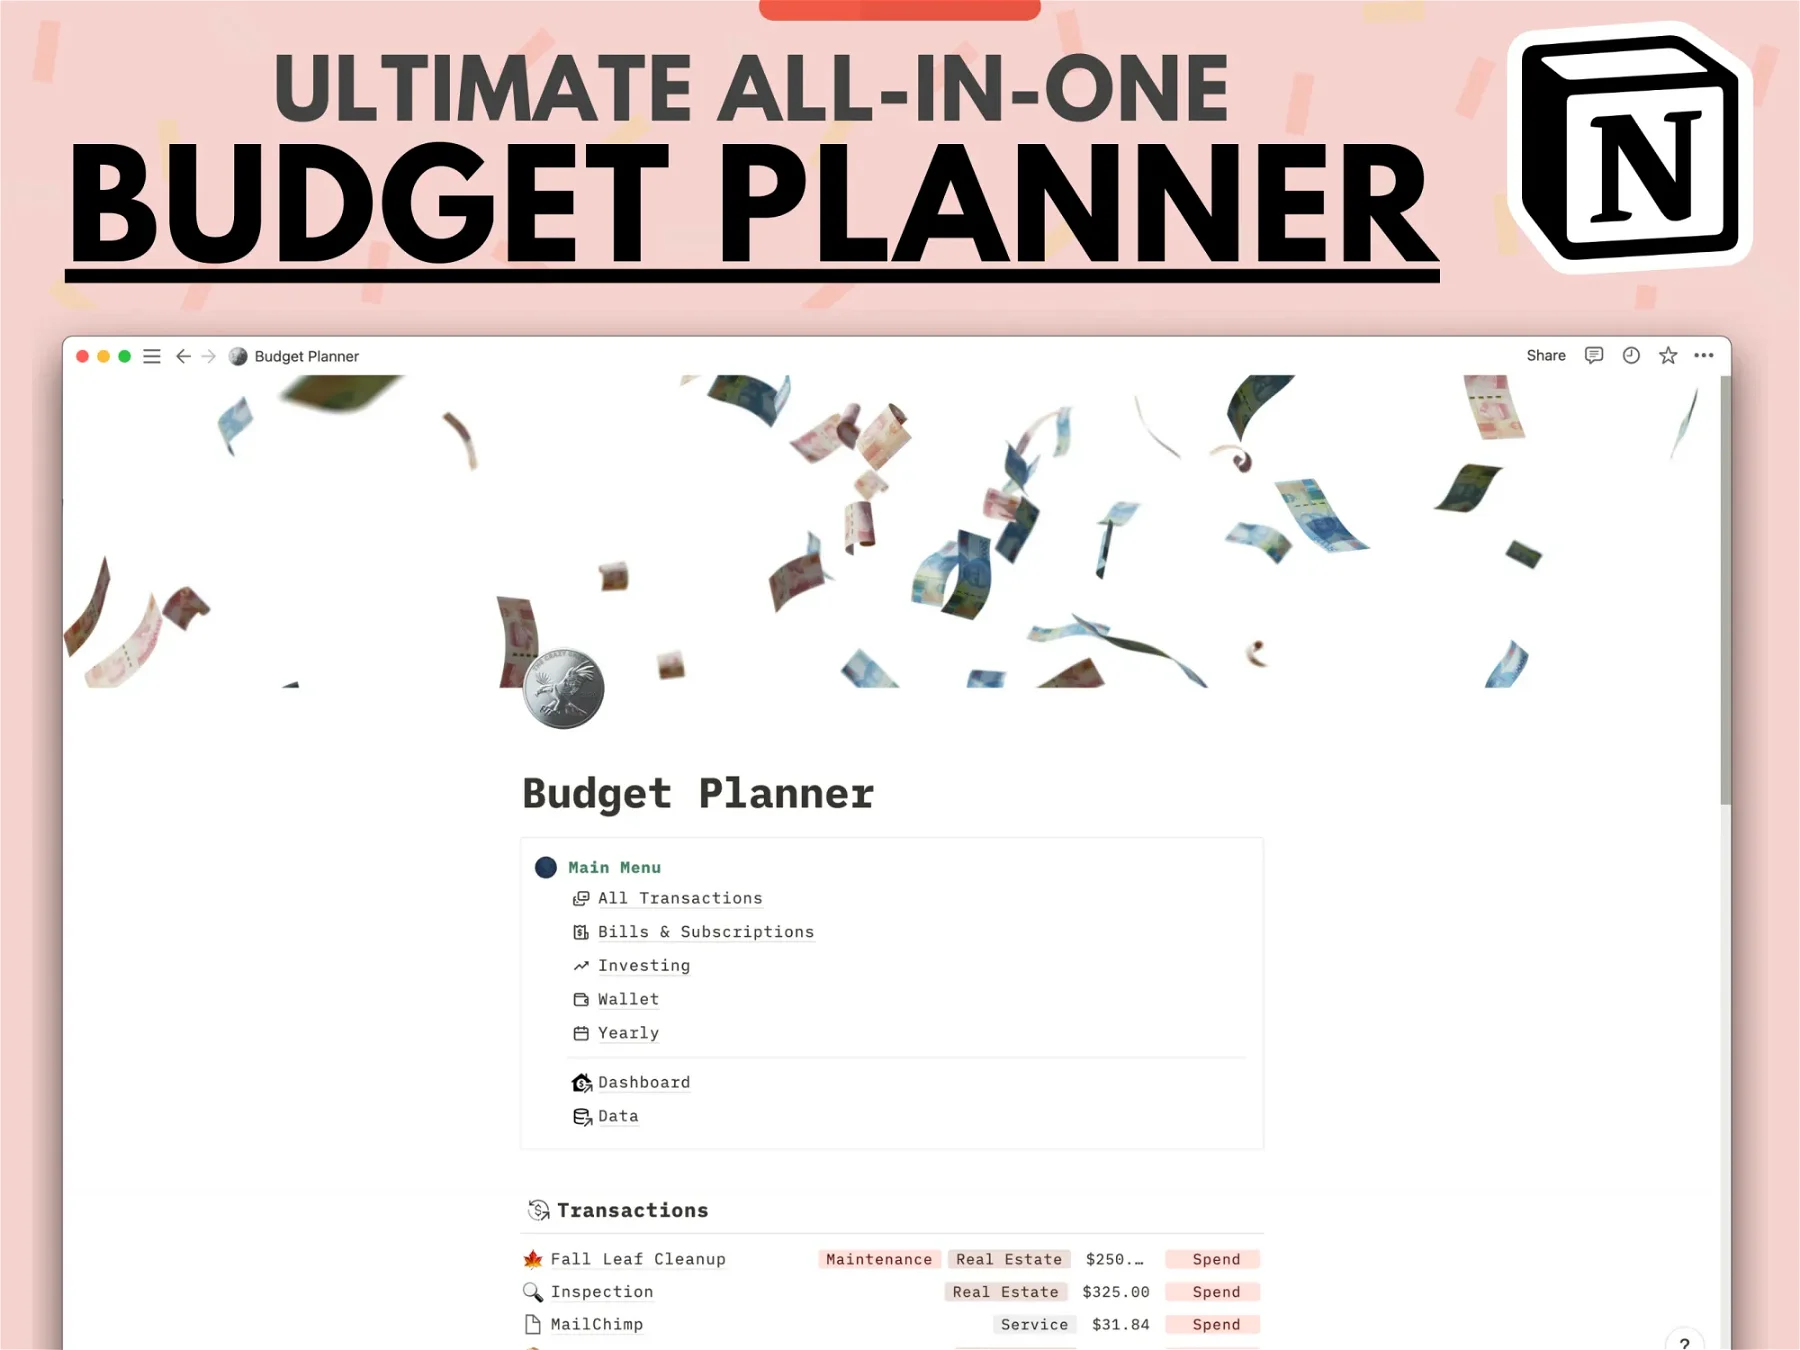 Ultimate All-in-One Budget Planner